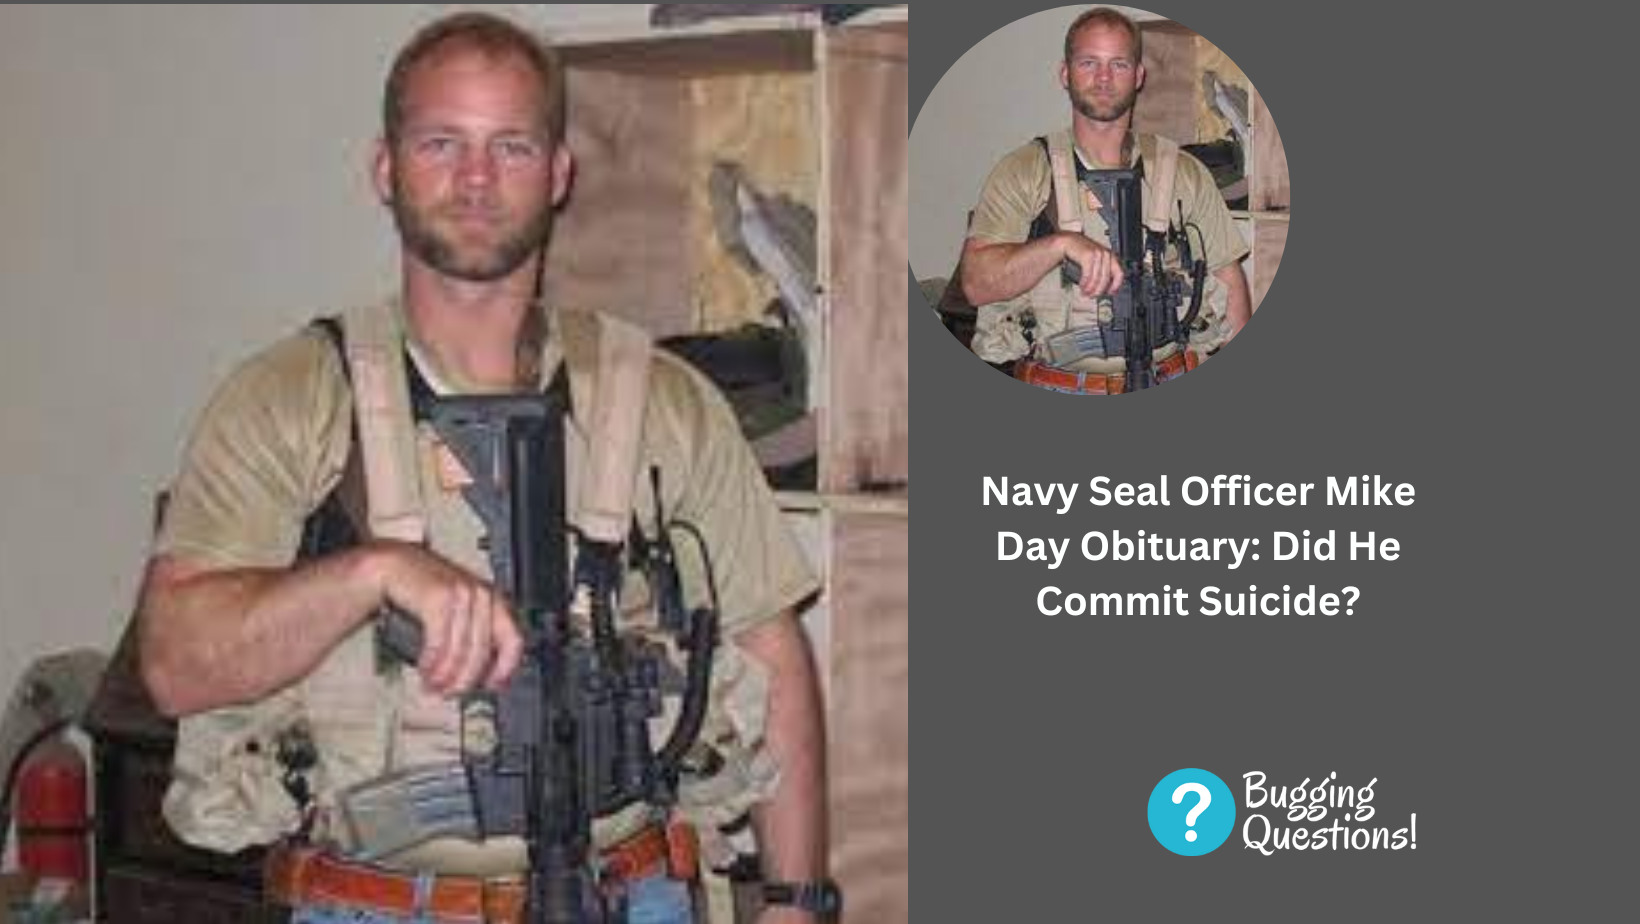 Navy Seal Officer Mike Day Obituary: Did He Commit Suicide?